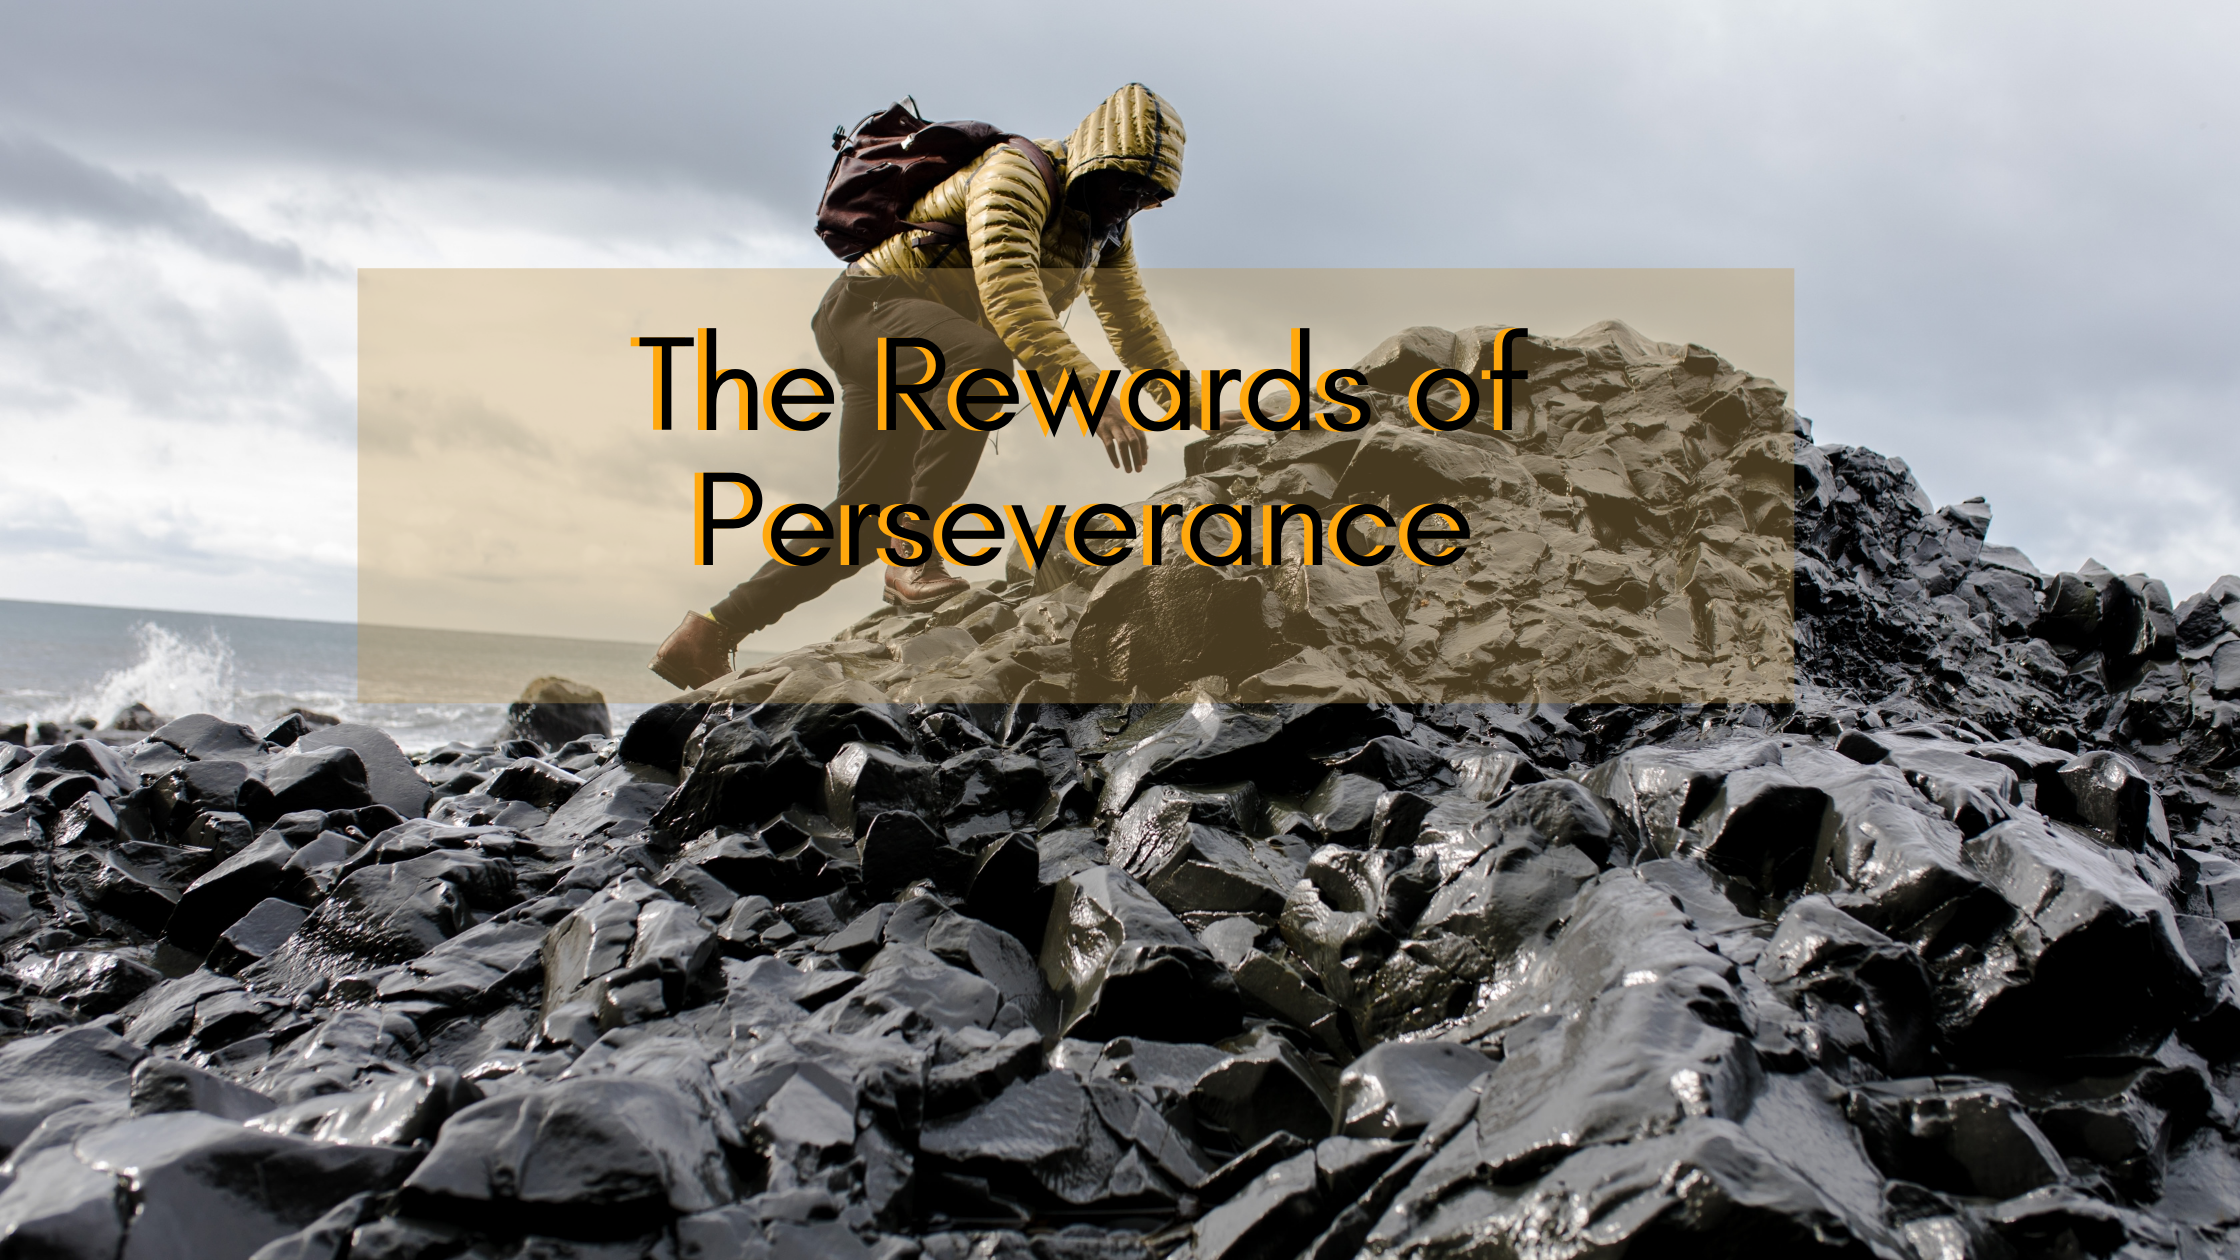 The Rewards of Perseverance